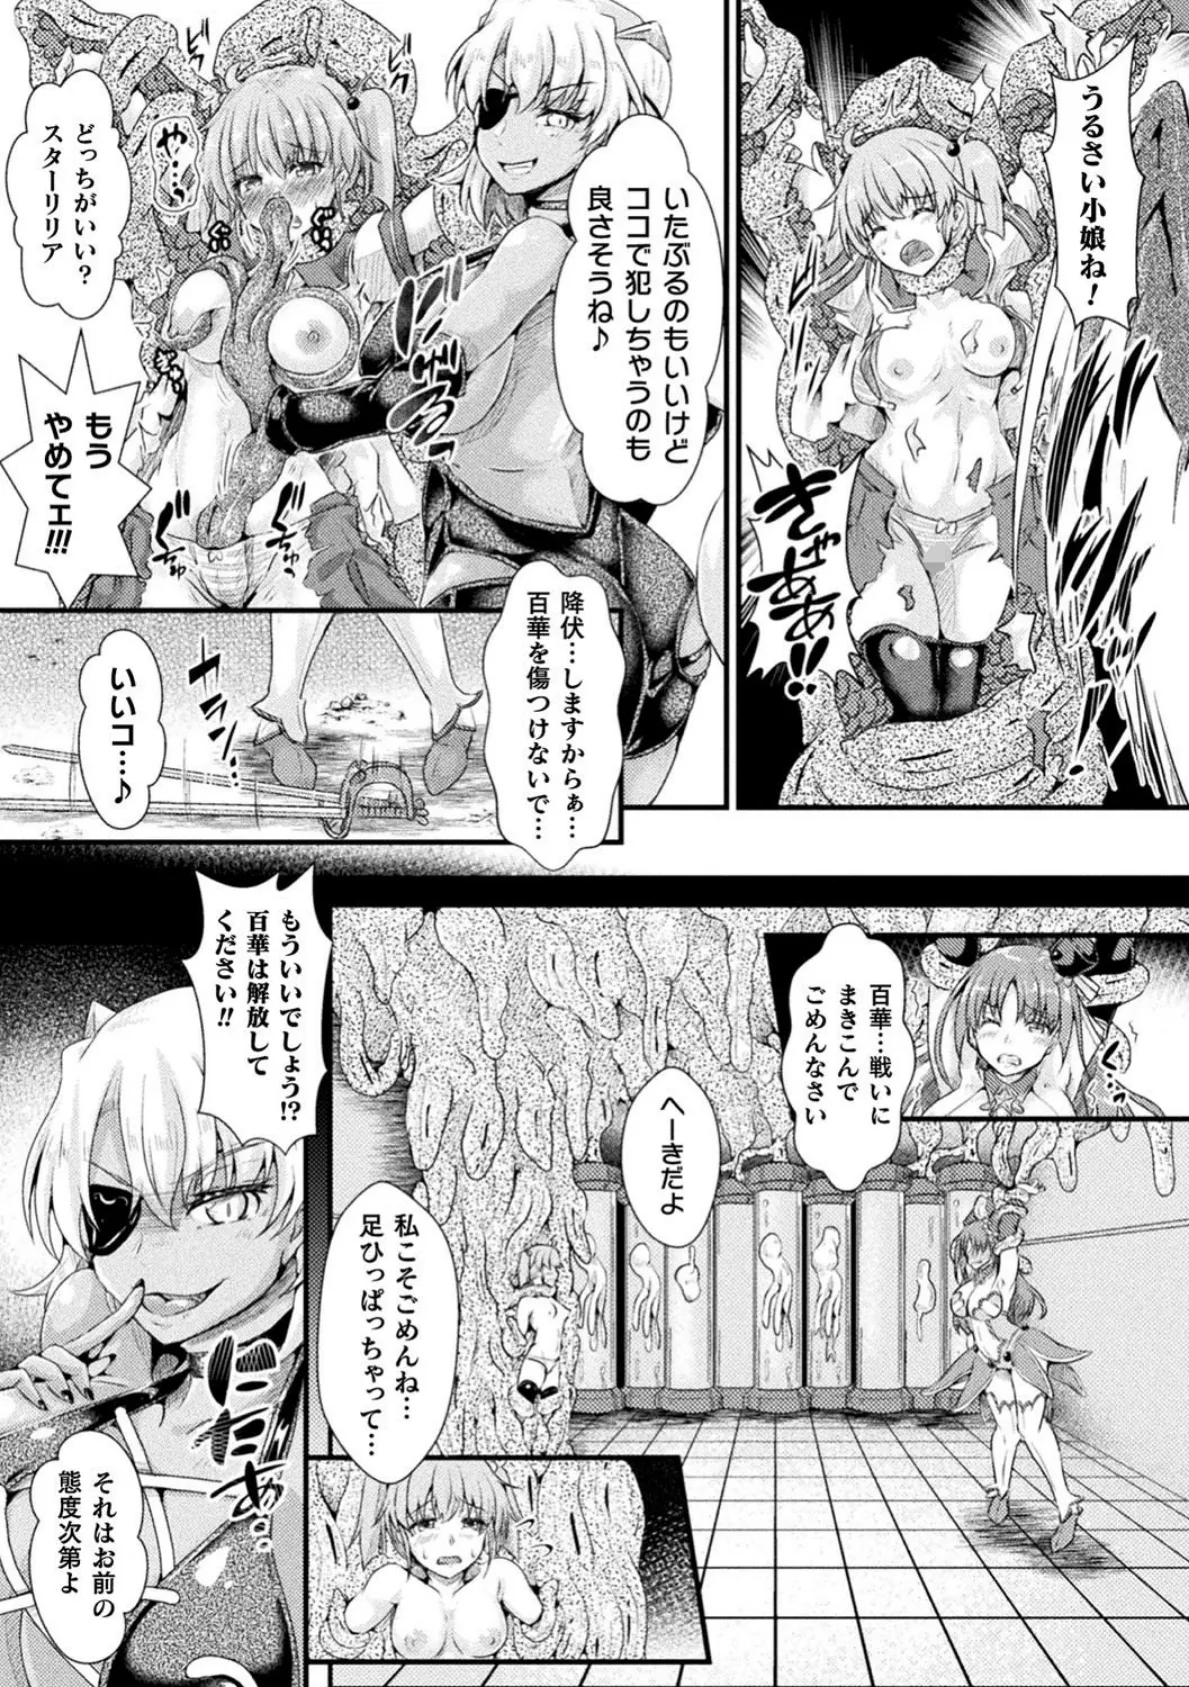 Corrupted Maiden 〜淫欲に堕ちる戦姫たち〜【電子書籍限定版】 5ページ